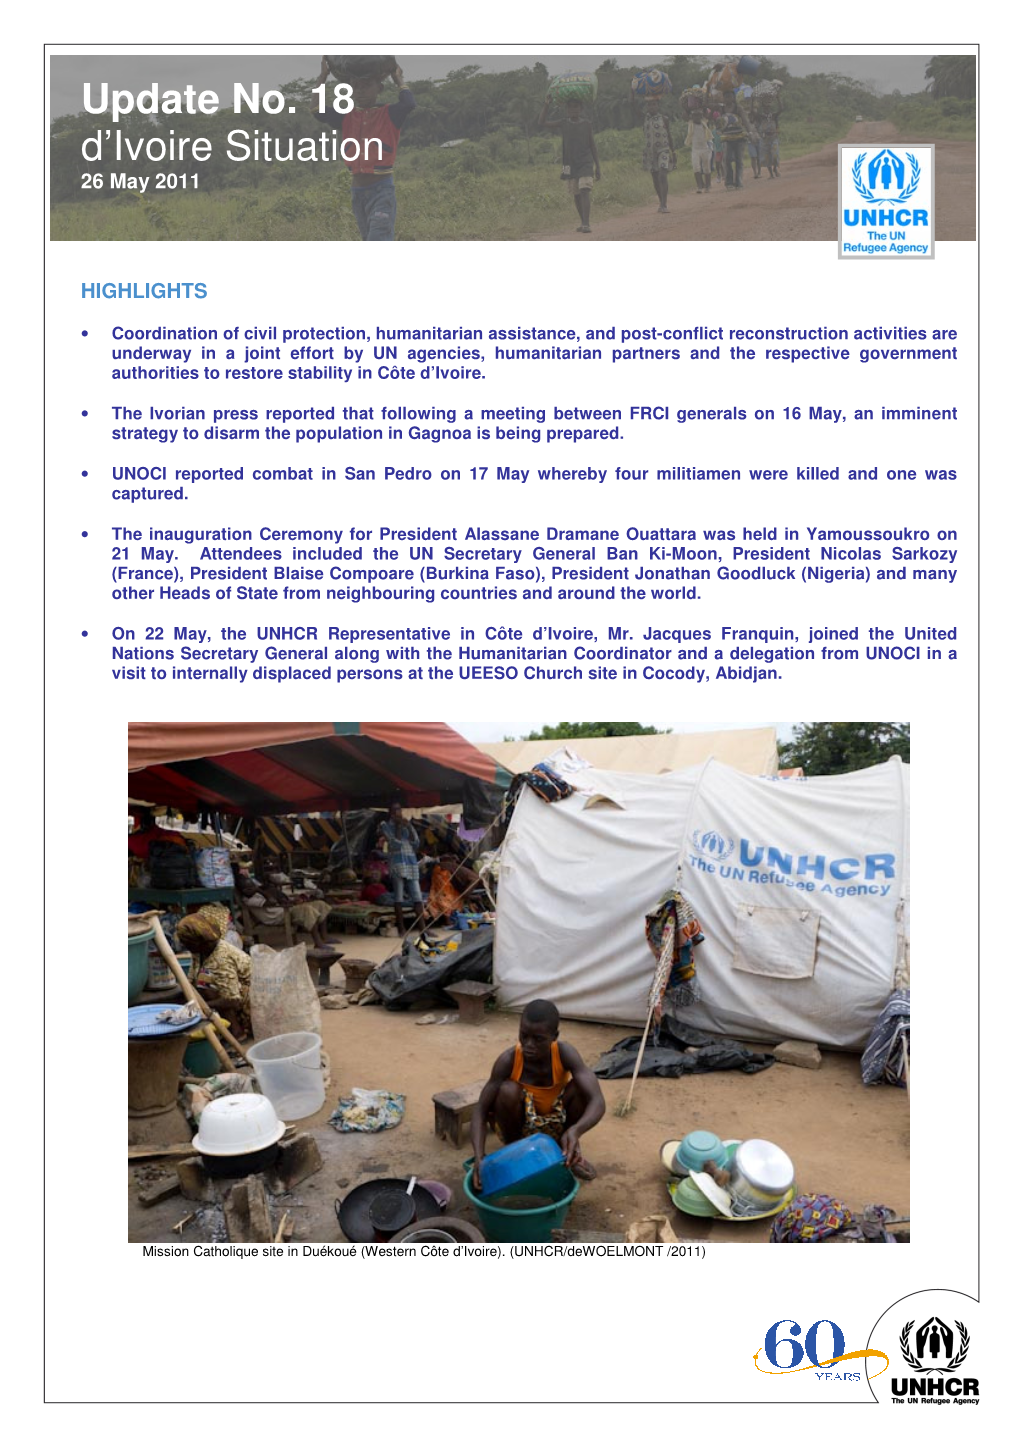 Update No. 18 D'ivoire Situation